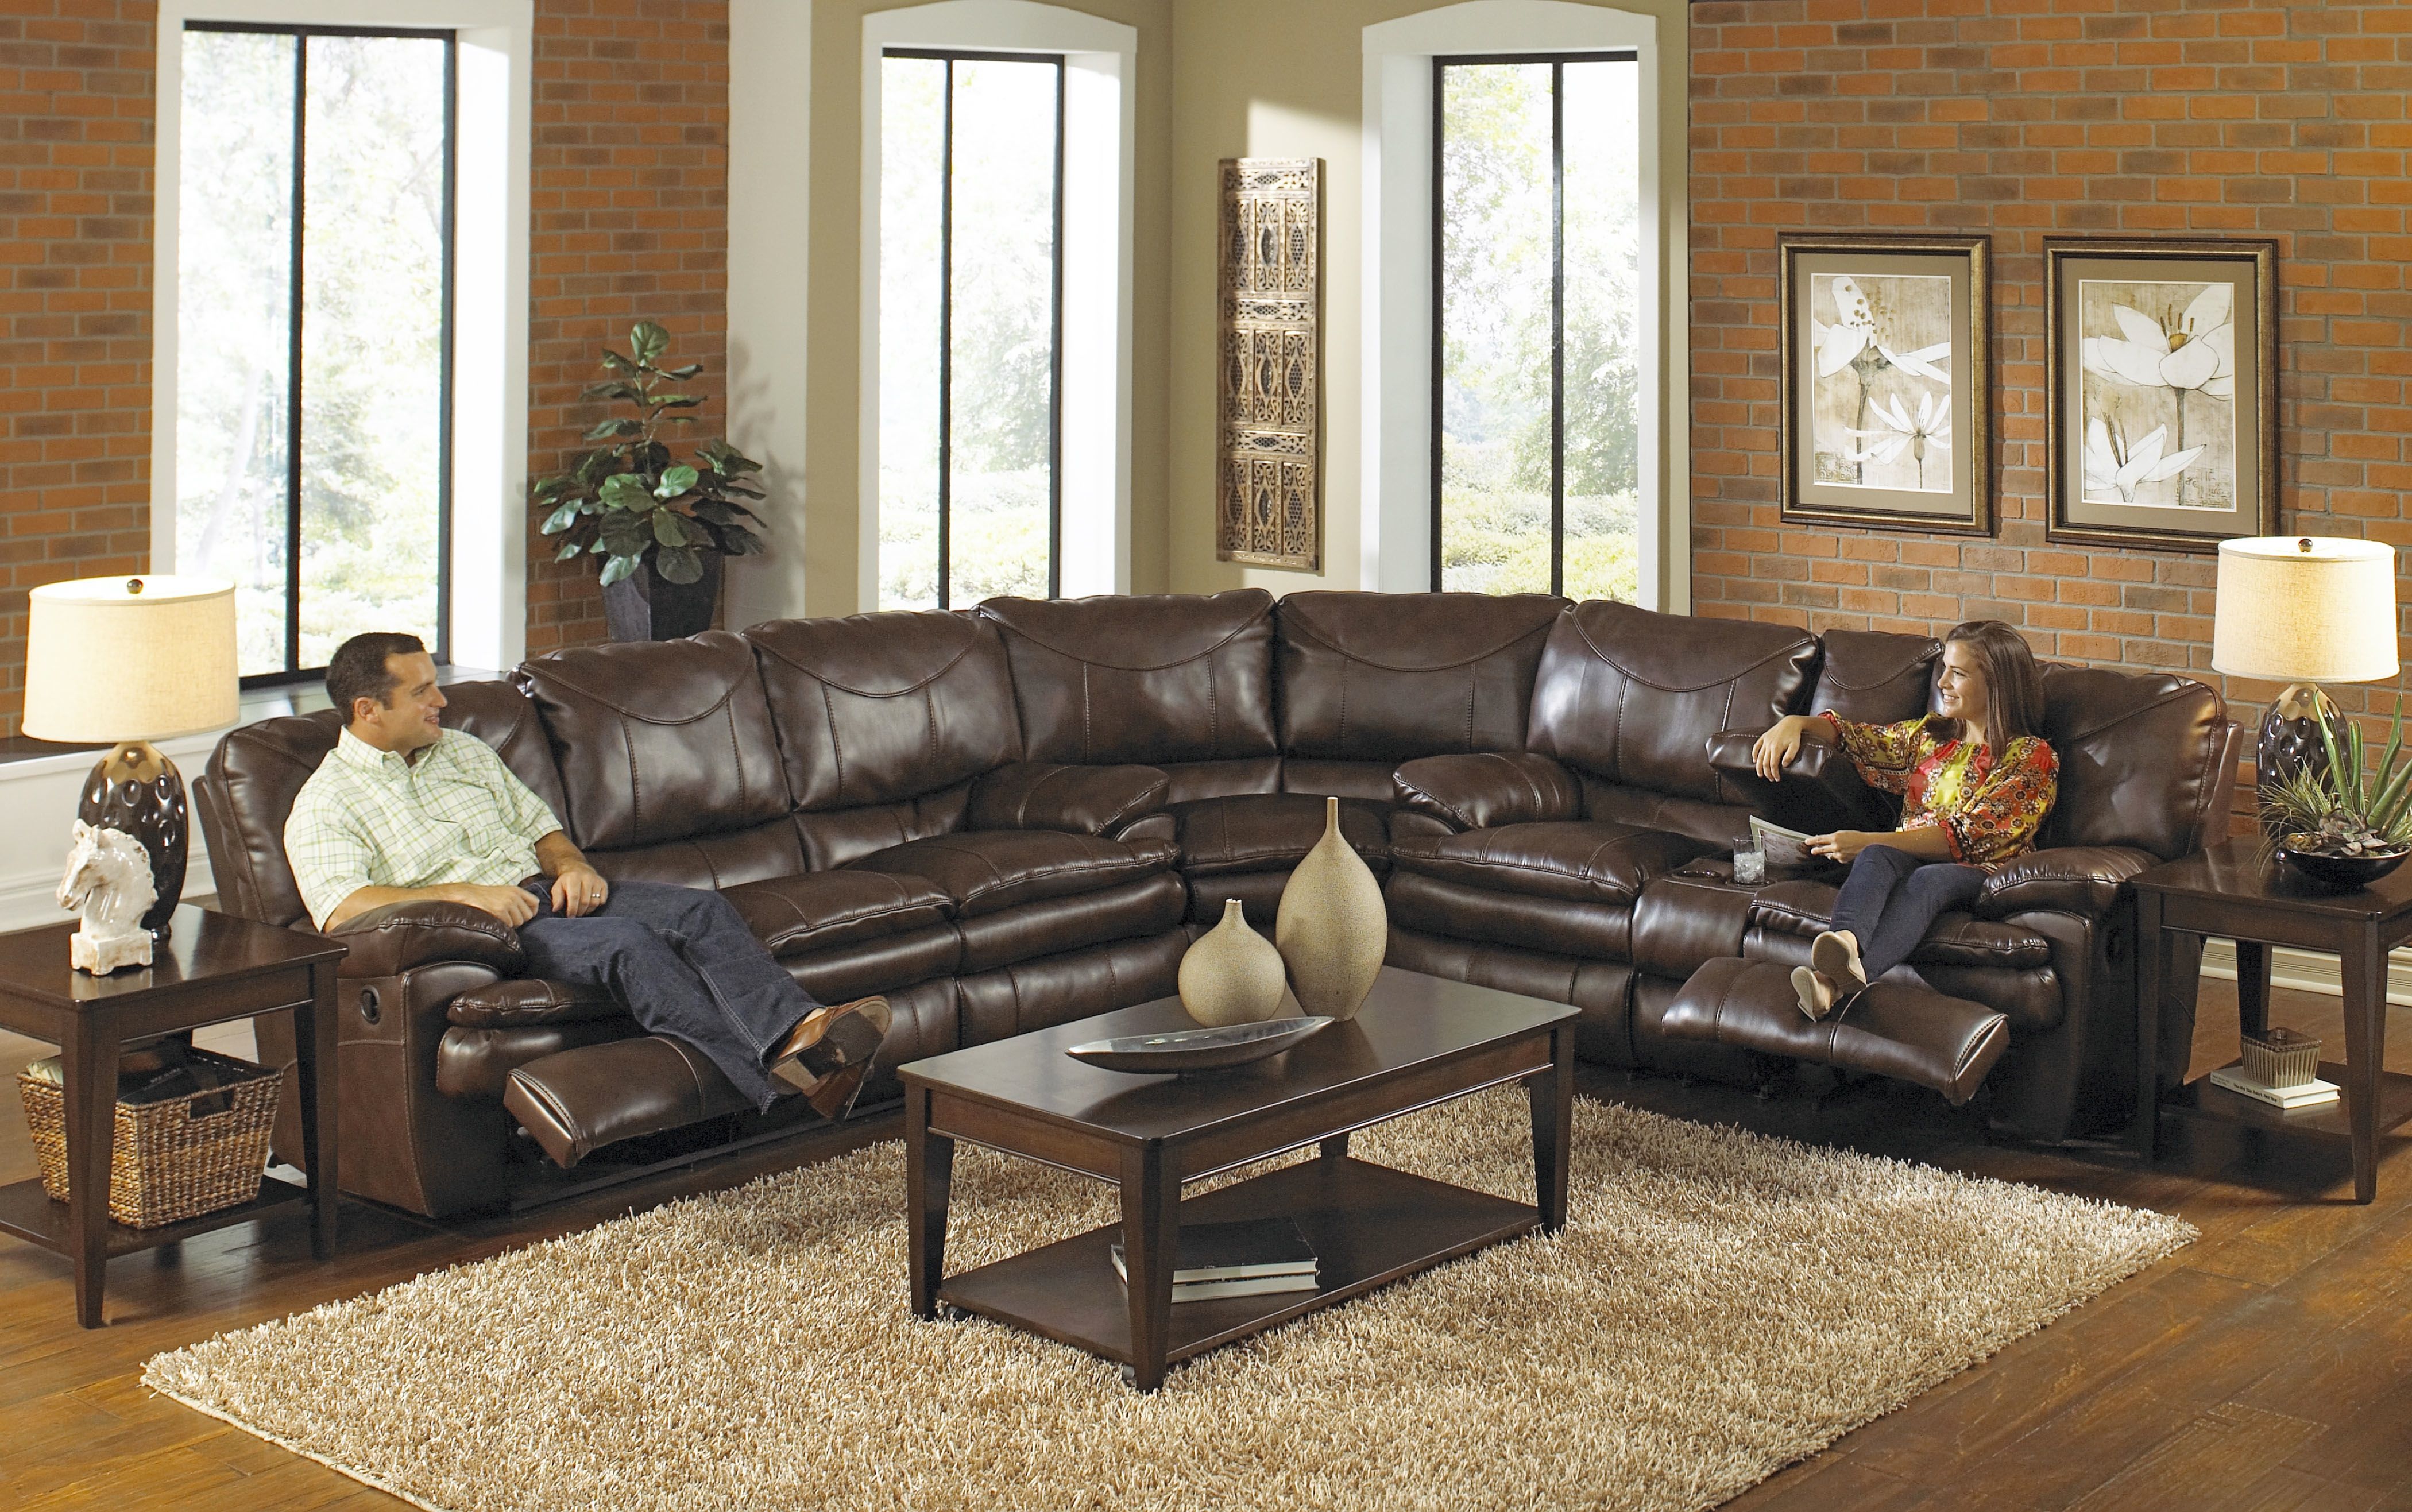 High Quality Sectional Sofas Cleanupflorida With Quality Sectional Sofa (View 2 of 12)